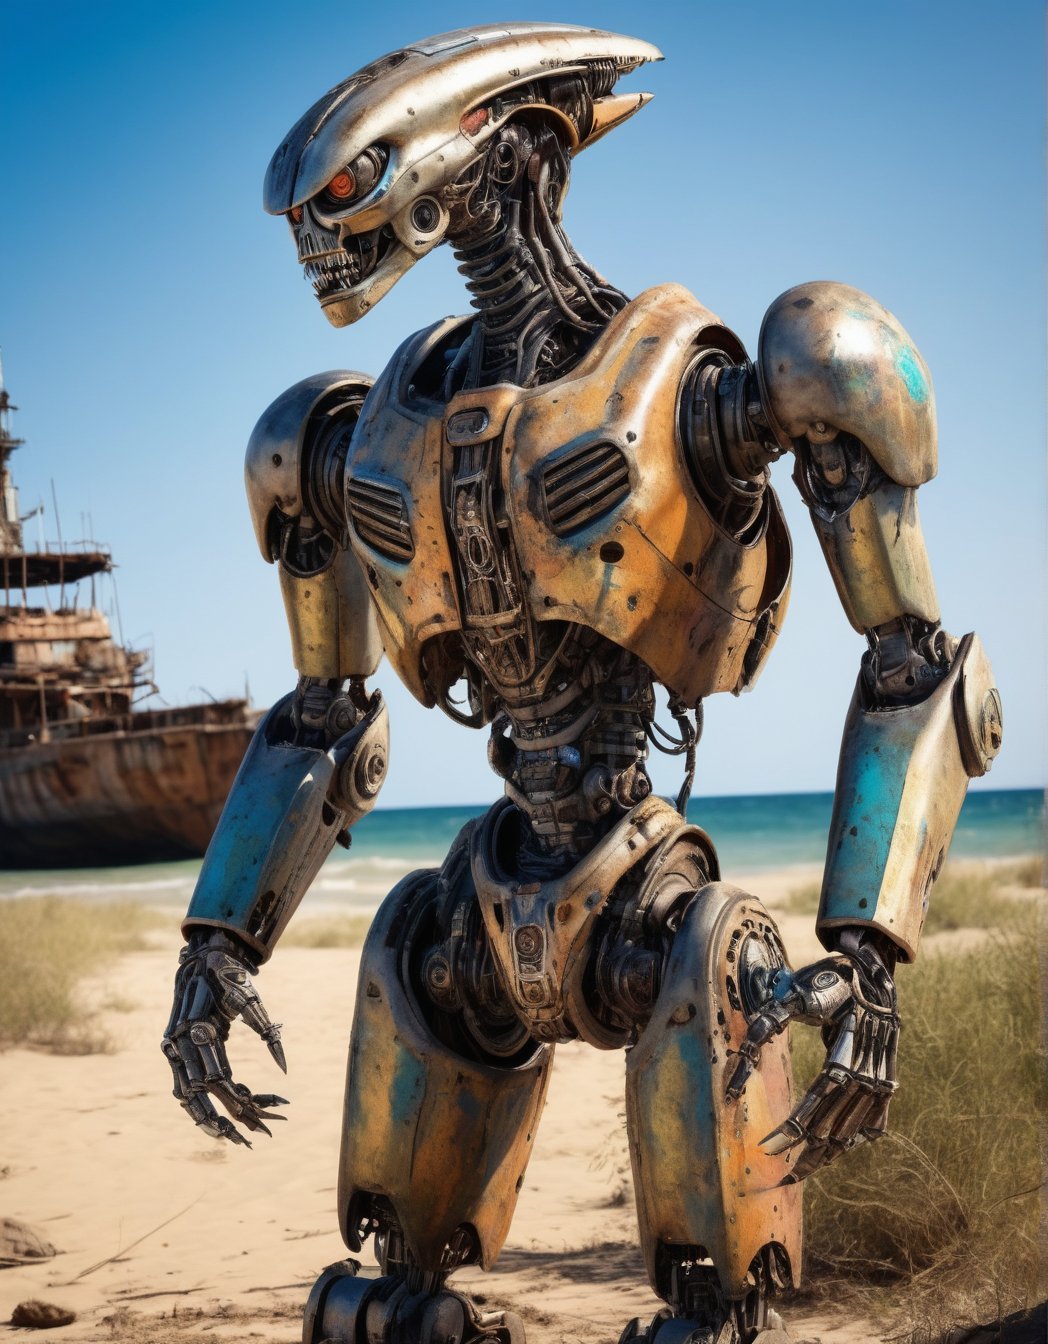 Ultra-realistic, hyper-detailed and very sharp photographic representation of a Incredible deteriorated robot with alien appearance,  (Enhancer textures), (Enhancer anatomy), metallic colors on its body, intrinsic details on its armor, defense position, background of an abandoned ship, (vivid colors), (perfect contrast), (better appearance)